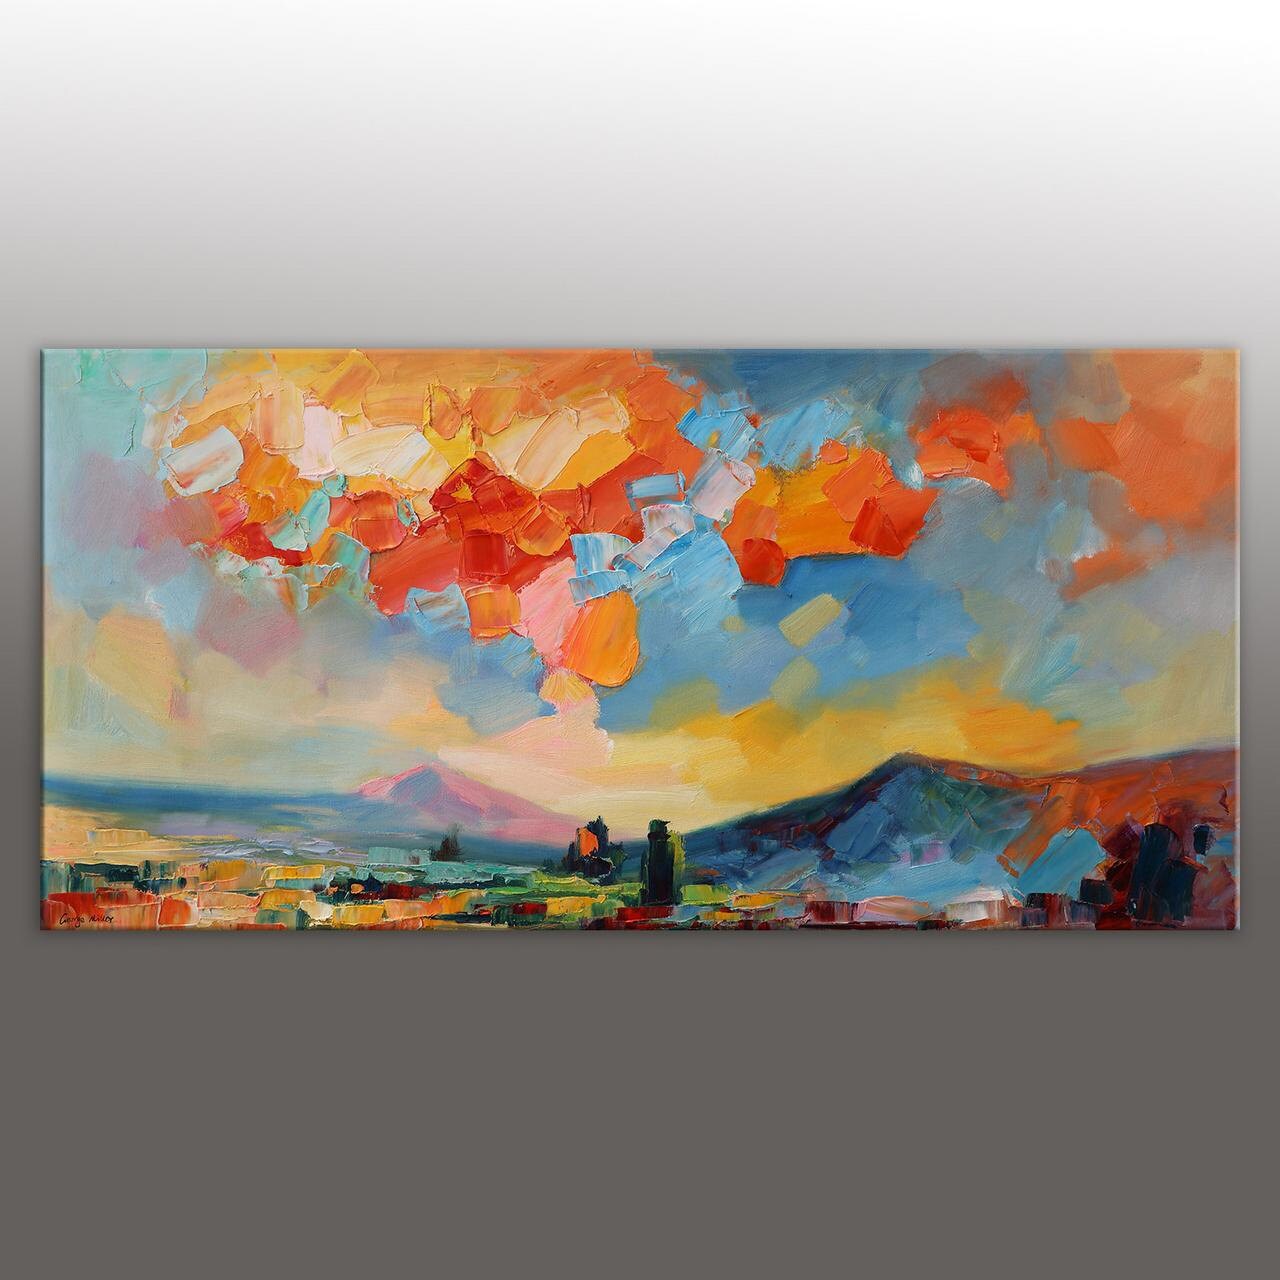 Art Painting, Abstract Painting, Landscape Art, Wall Art, Contemporary Art, Original Abstract Art, Abstract Canvas Art, Oil Painting, Large